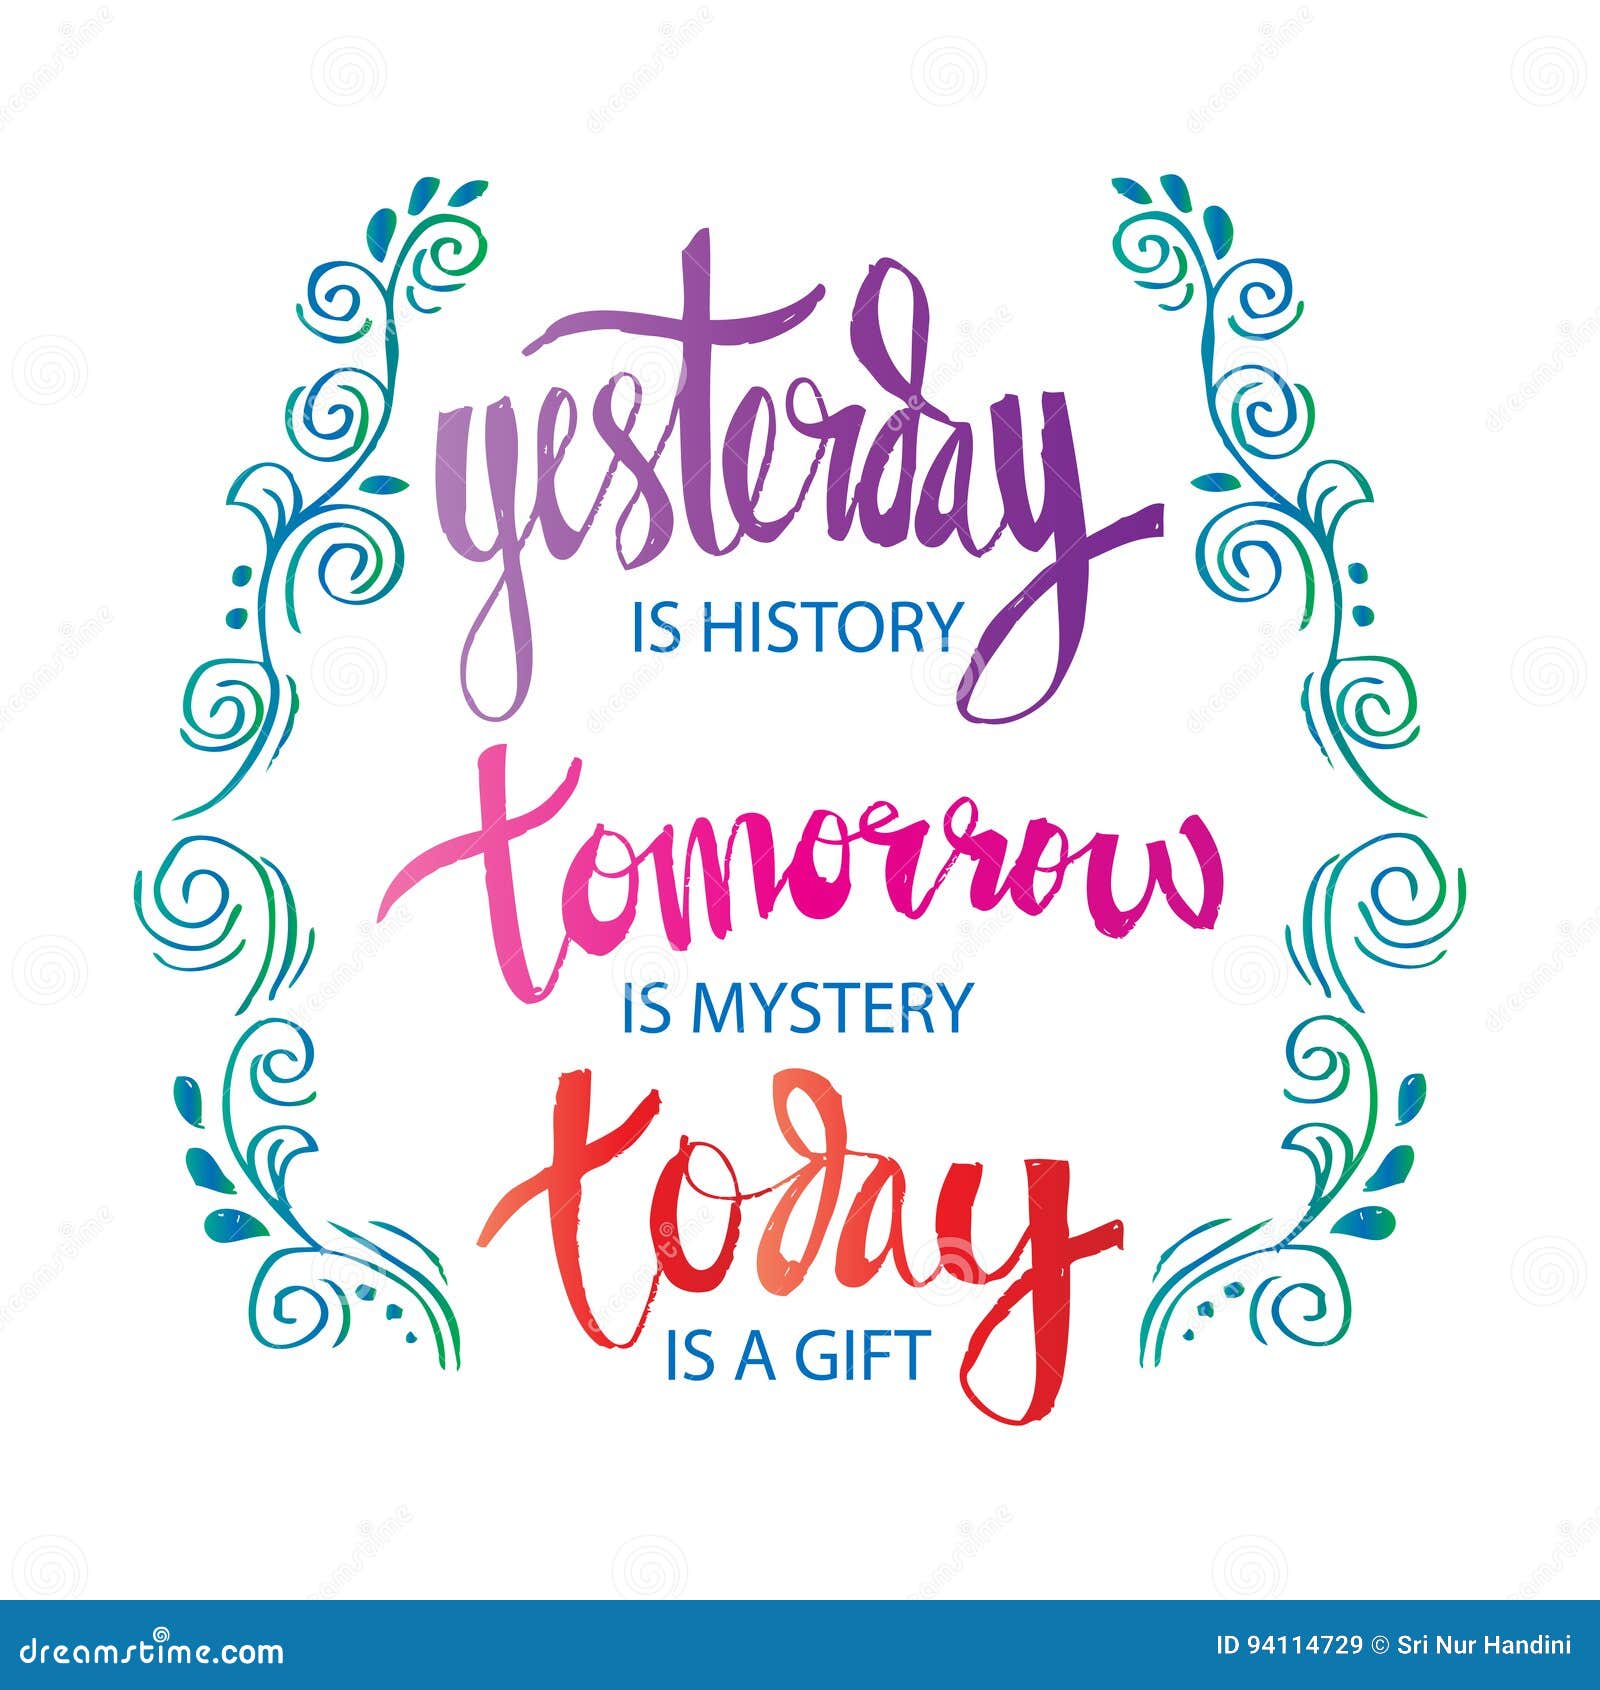 Is is tomorrow mystery gift today Quote Yesterday